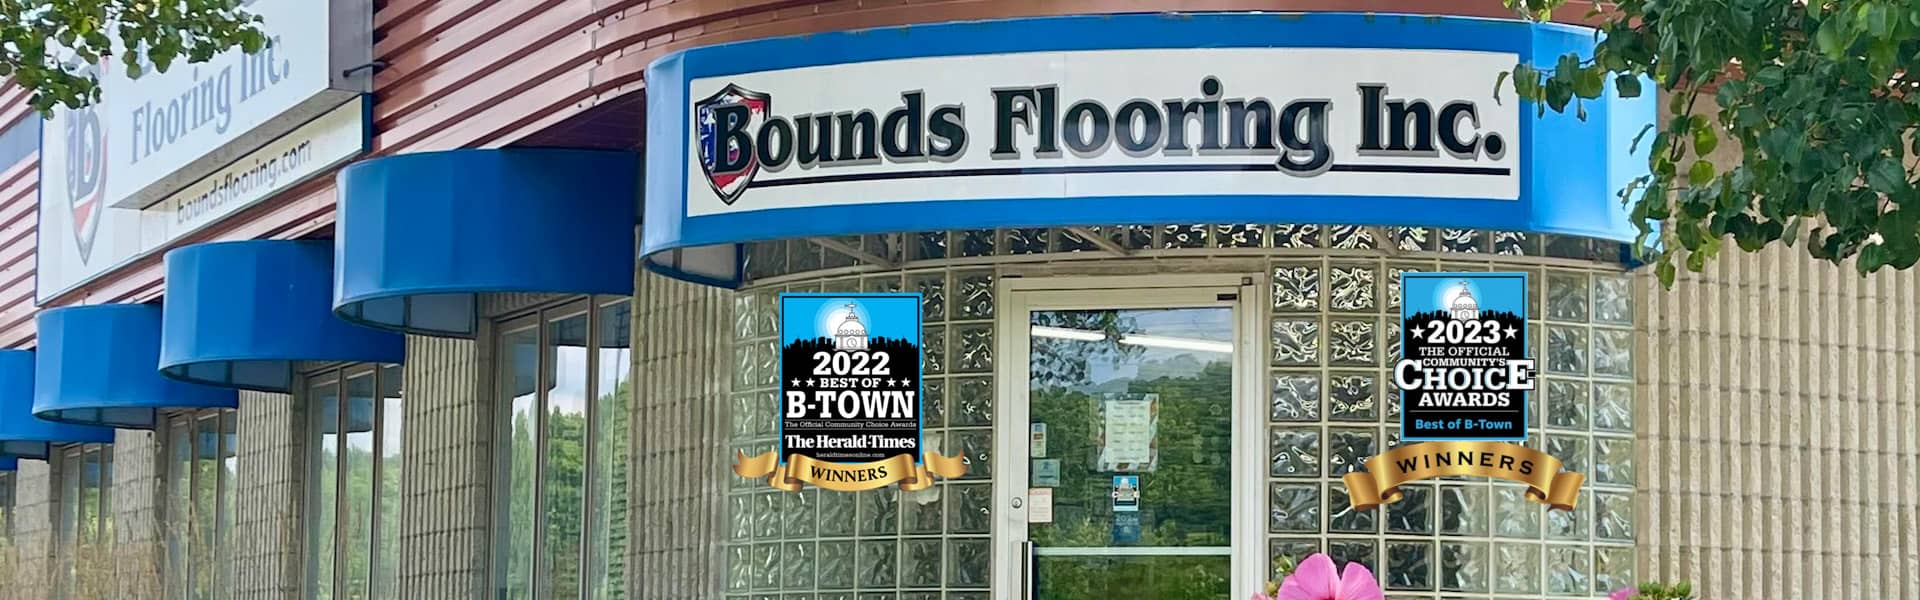 Bounds Flooring Storefront with Best of B-Town Awards